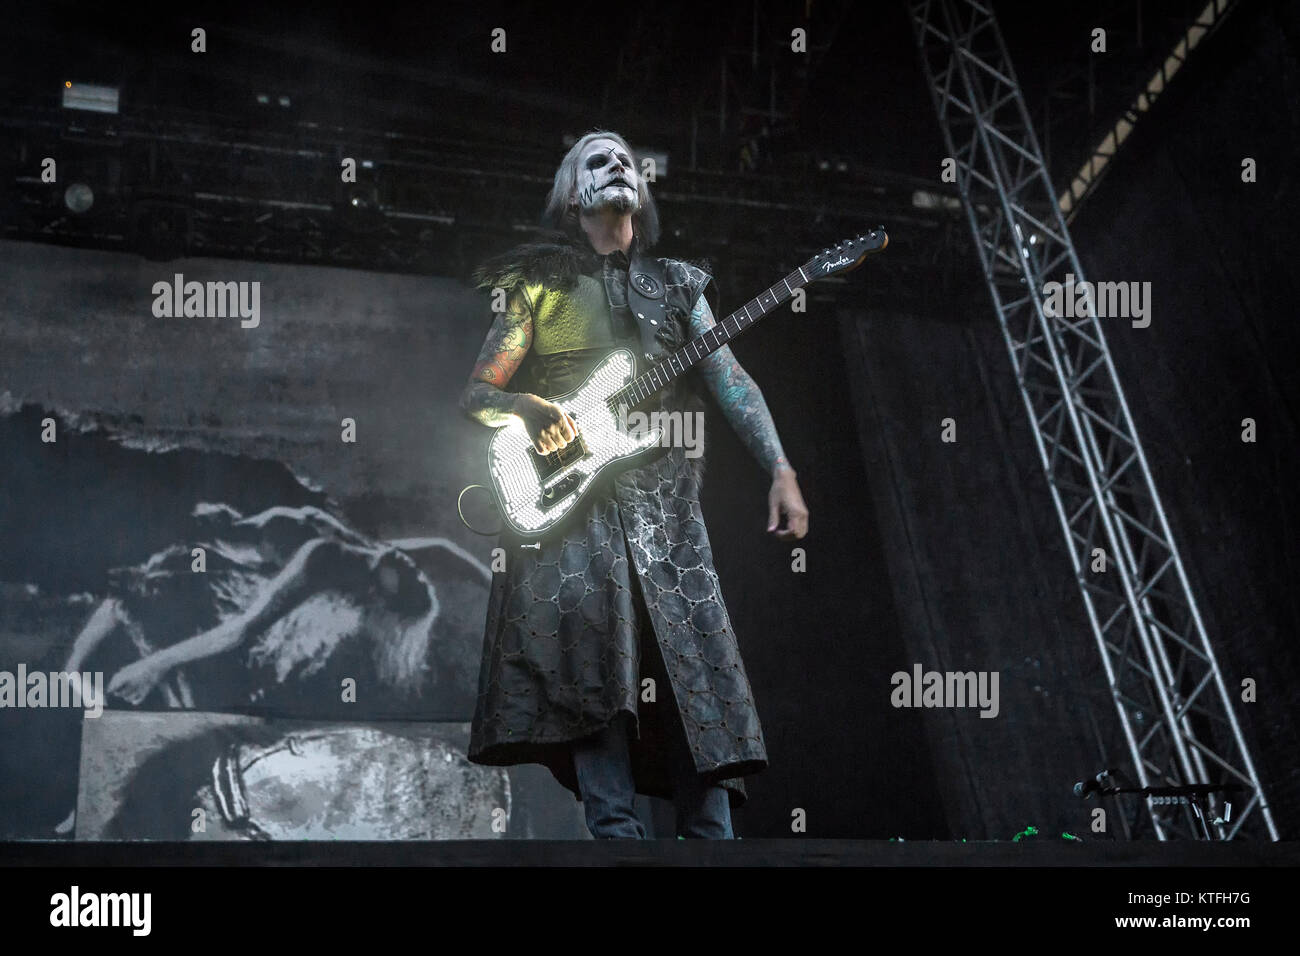 Norway, Halden – June 22, 2017. Guitarist John 5 performs live with the American singer and musician Rob Zombie performs during the Norwegian music festival Tons of Rock 2017. Stock Photo